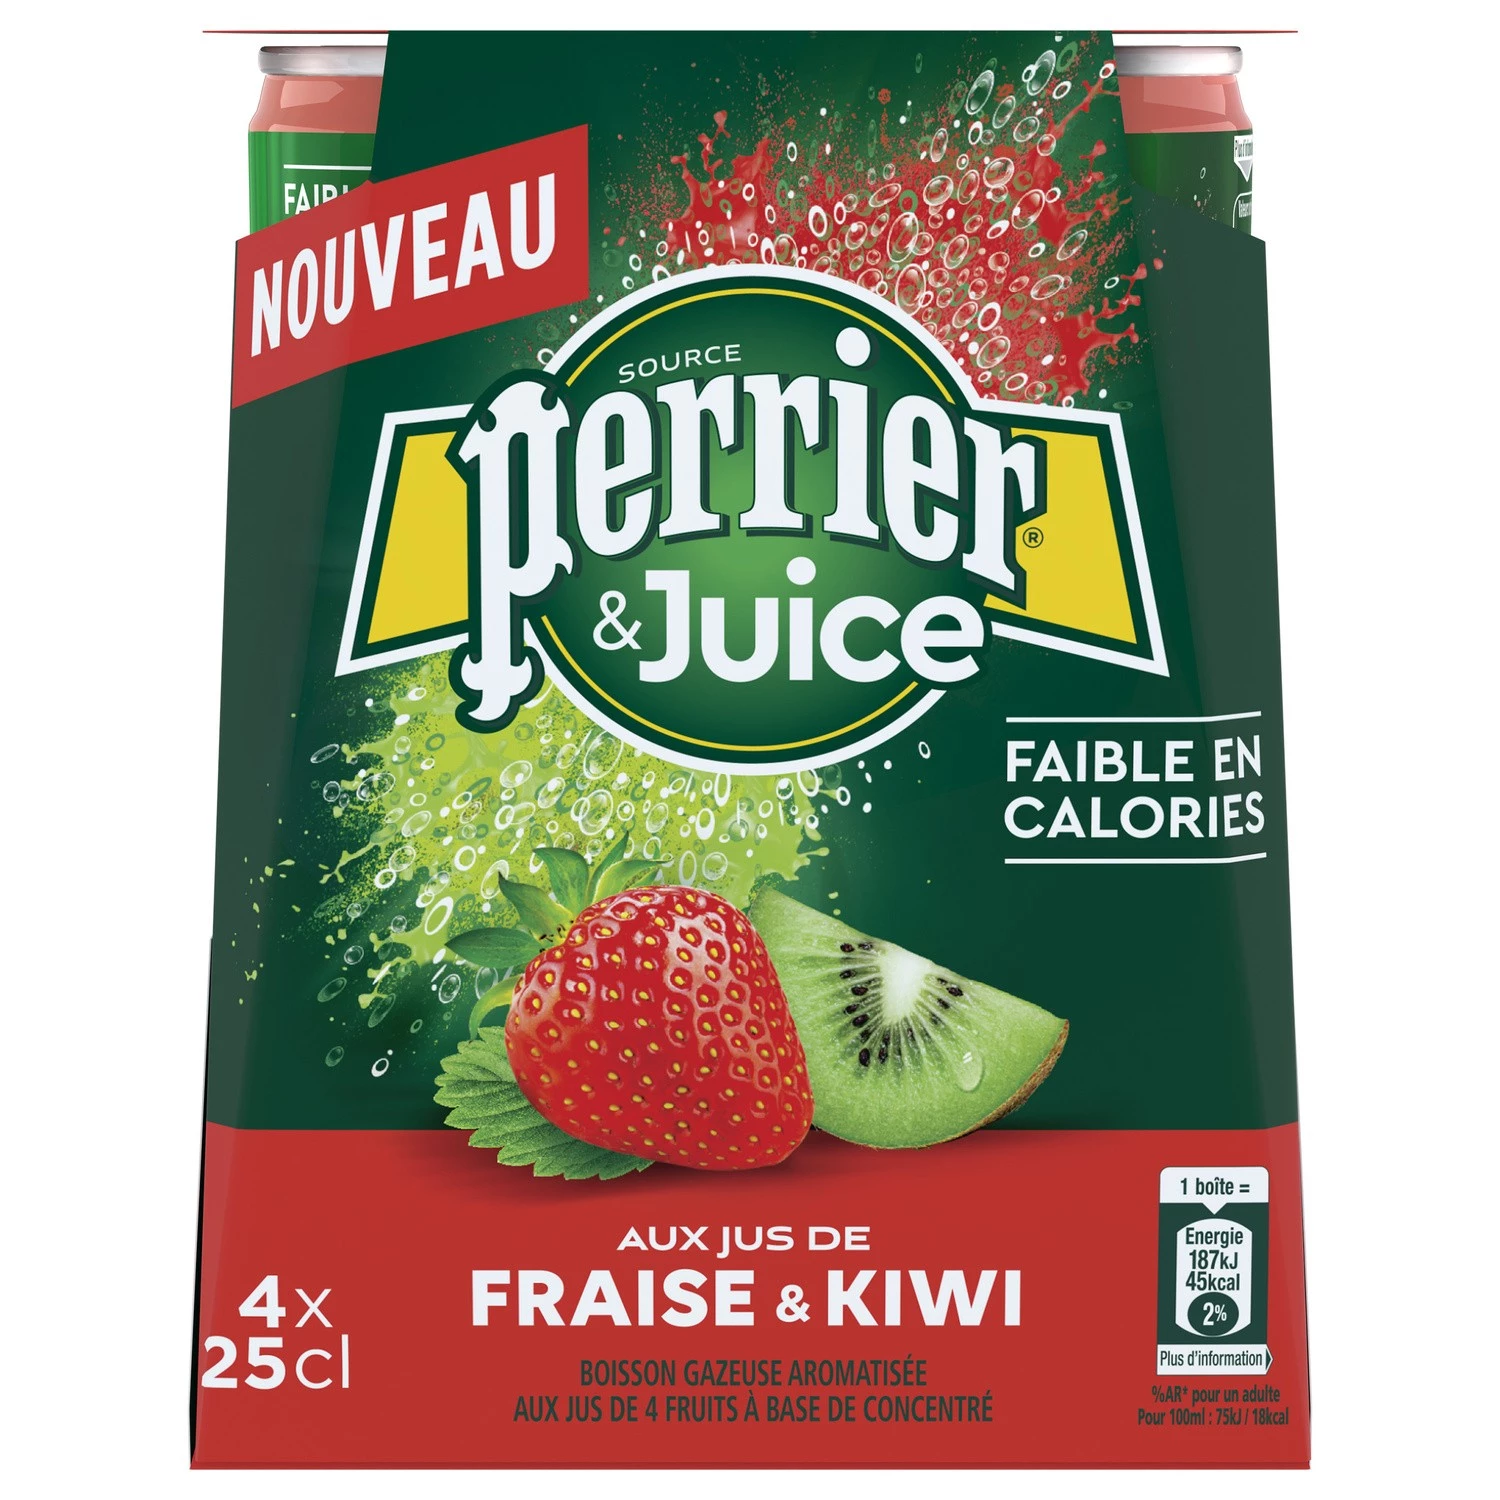 Strawberry-kiwi flavored sparkling water 4x25cl - PERRIER & JUICY